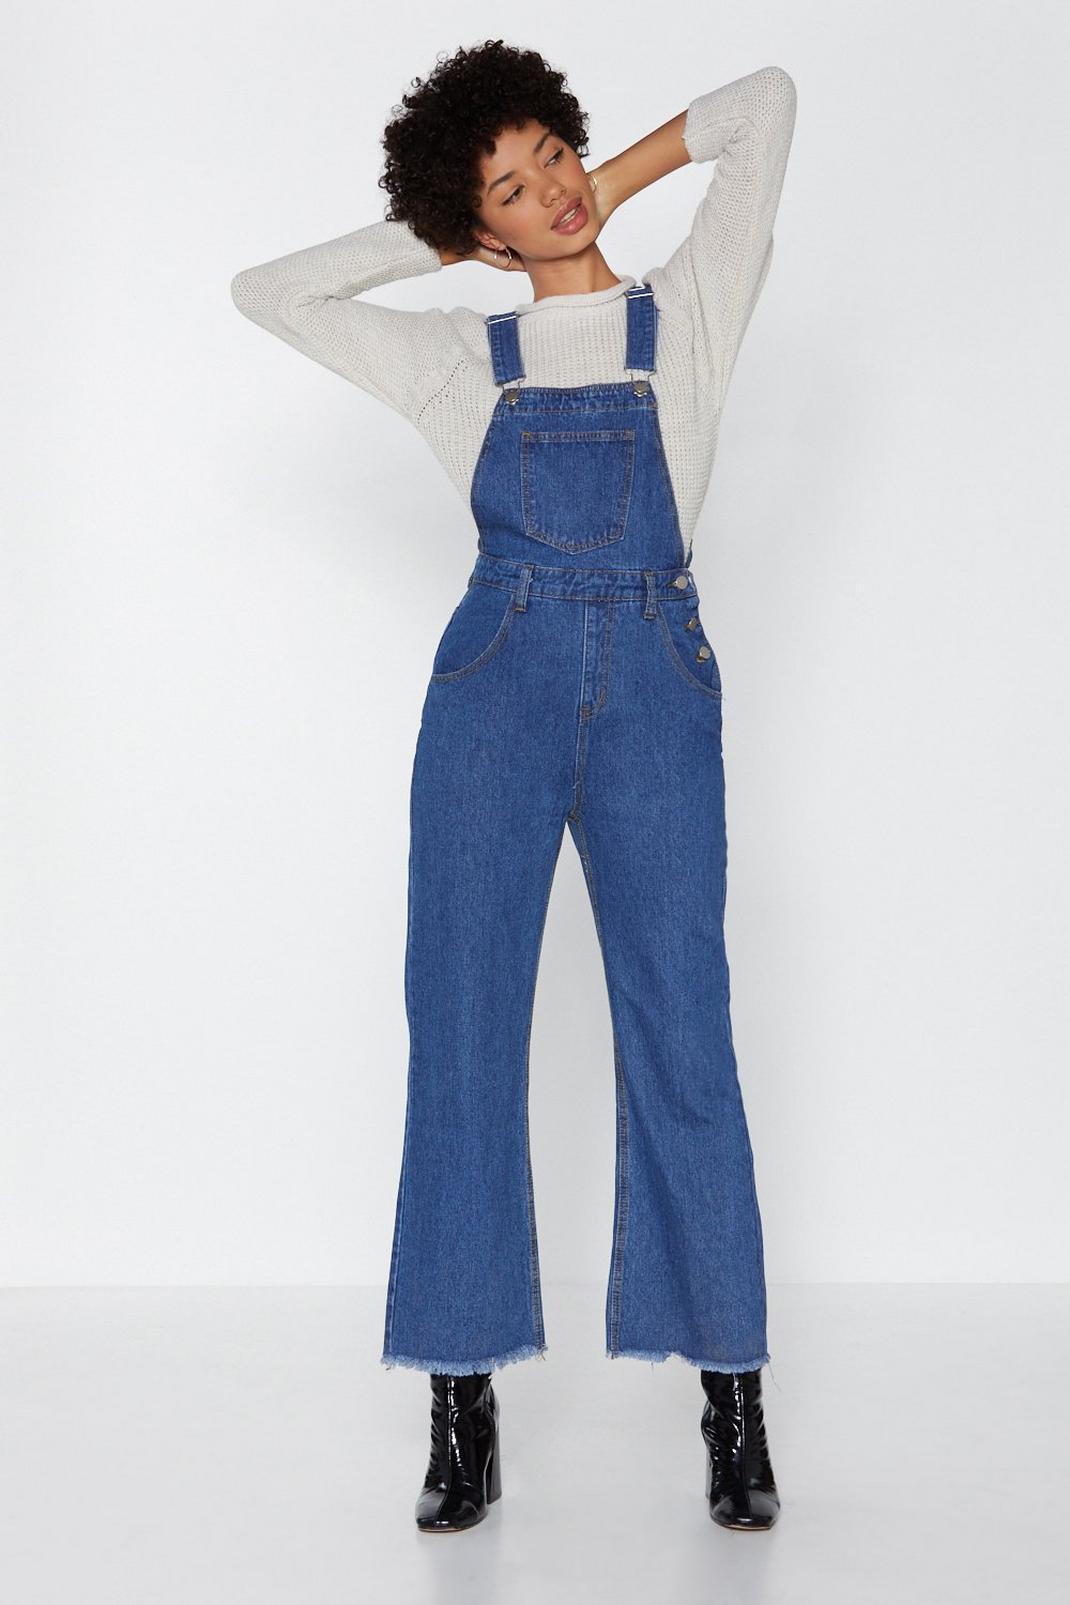 There She Goes Denim Overalls image number 1